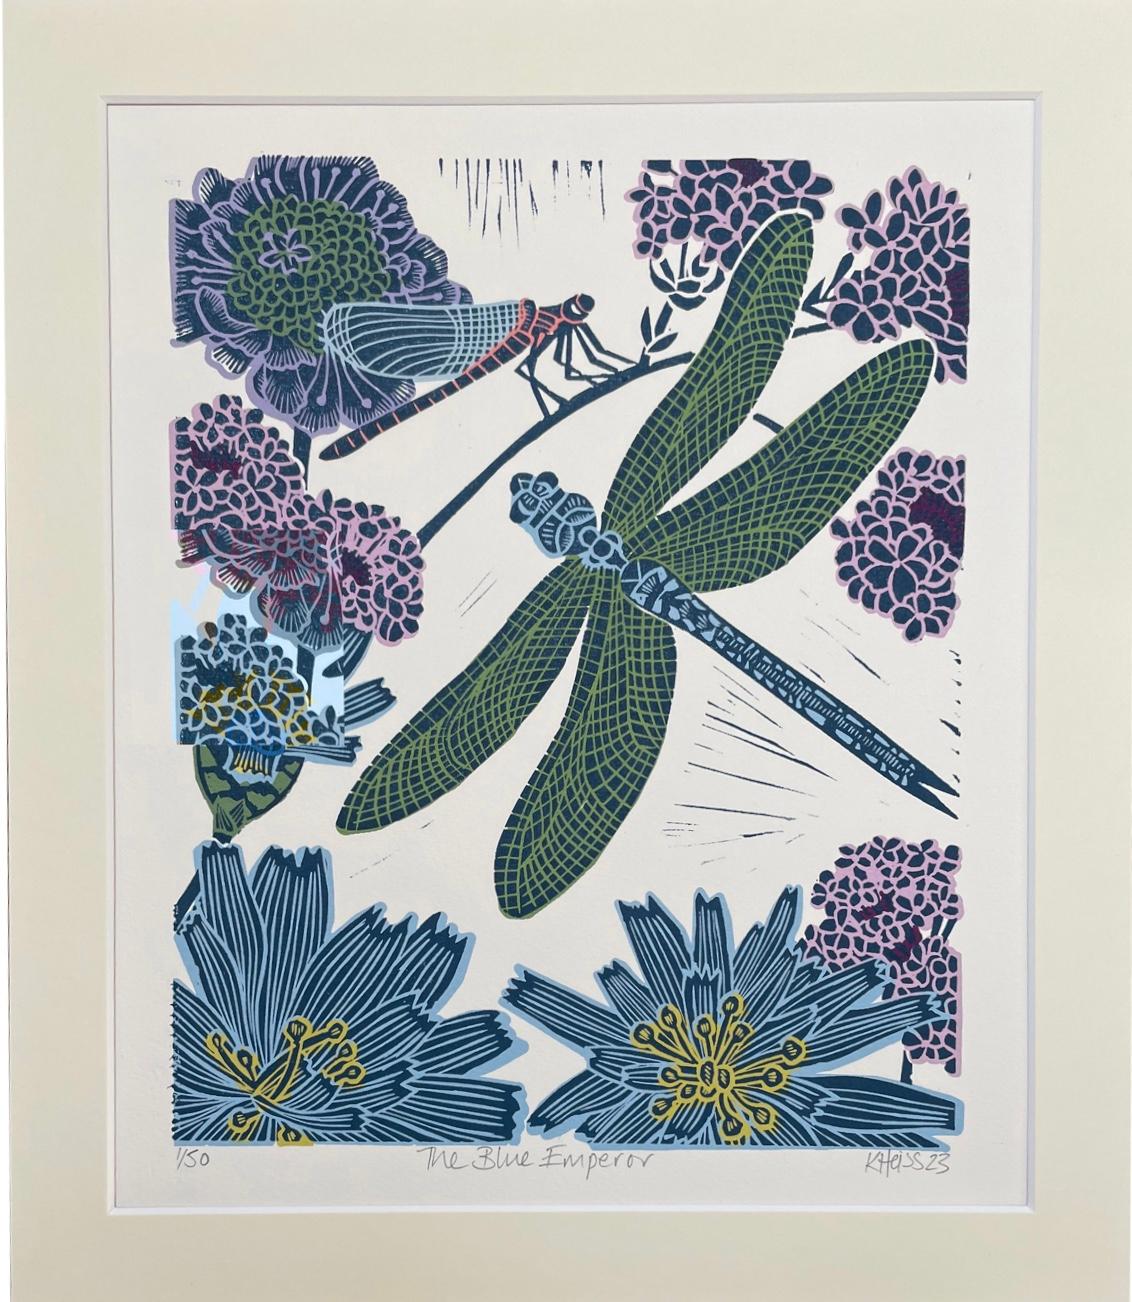 This print features a Blue Emperor Dragonfly flying over verbena and cornflowers. Printed in a palette of lilac, green and blue. It is a Hybrid Print - Traditional Hand pulled Linocut on Archival Digital Inks. Linocut Print – A relief printing